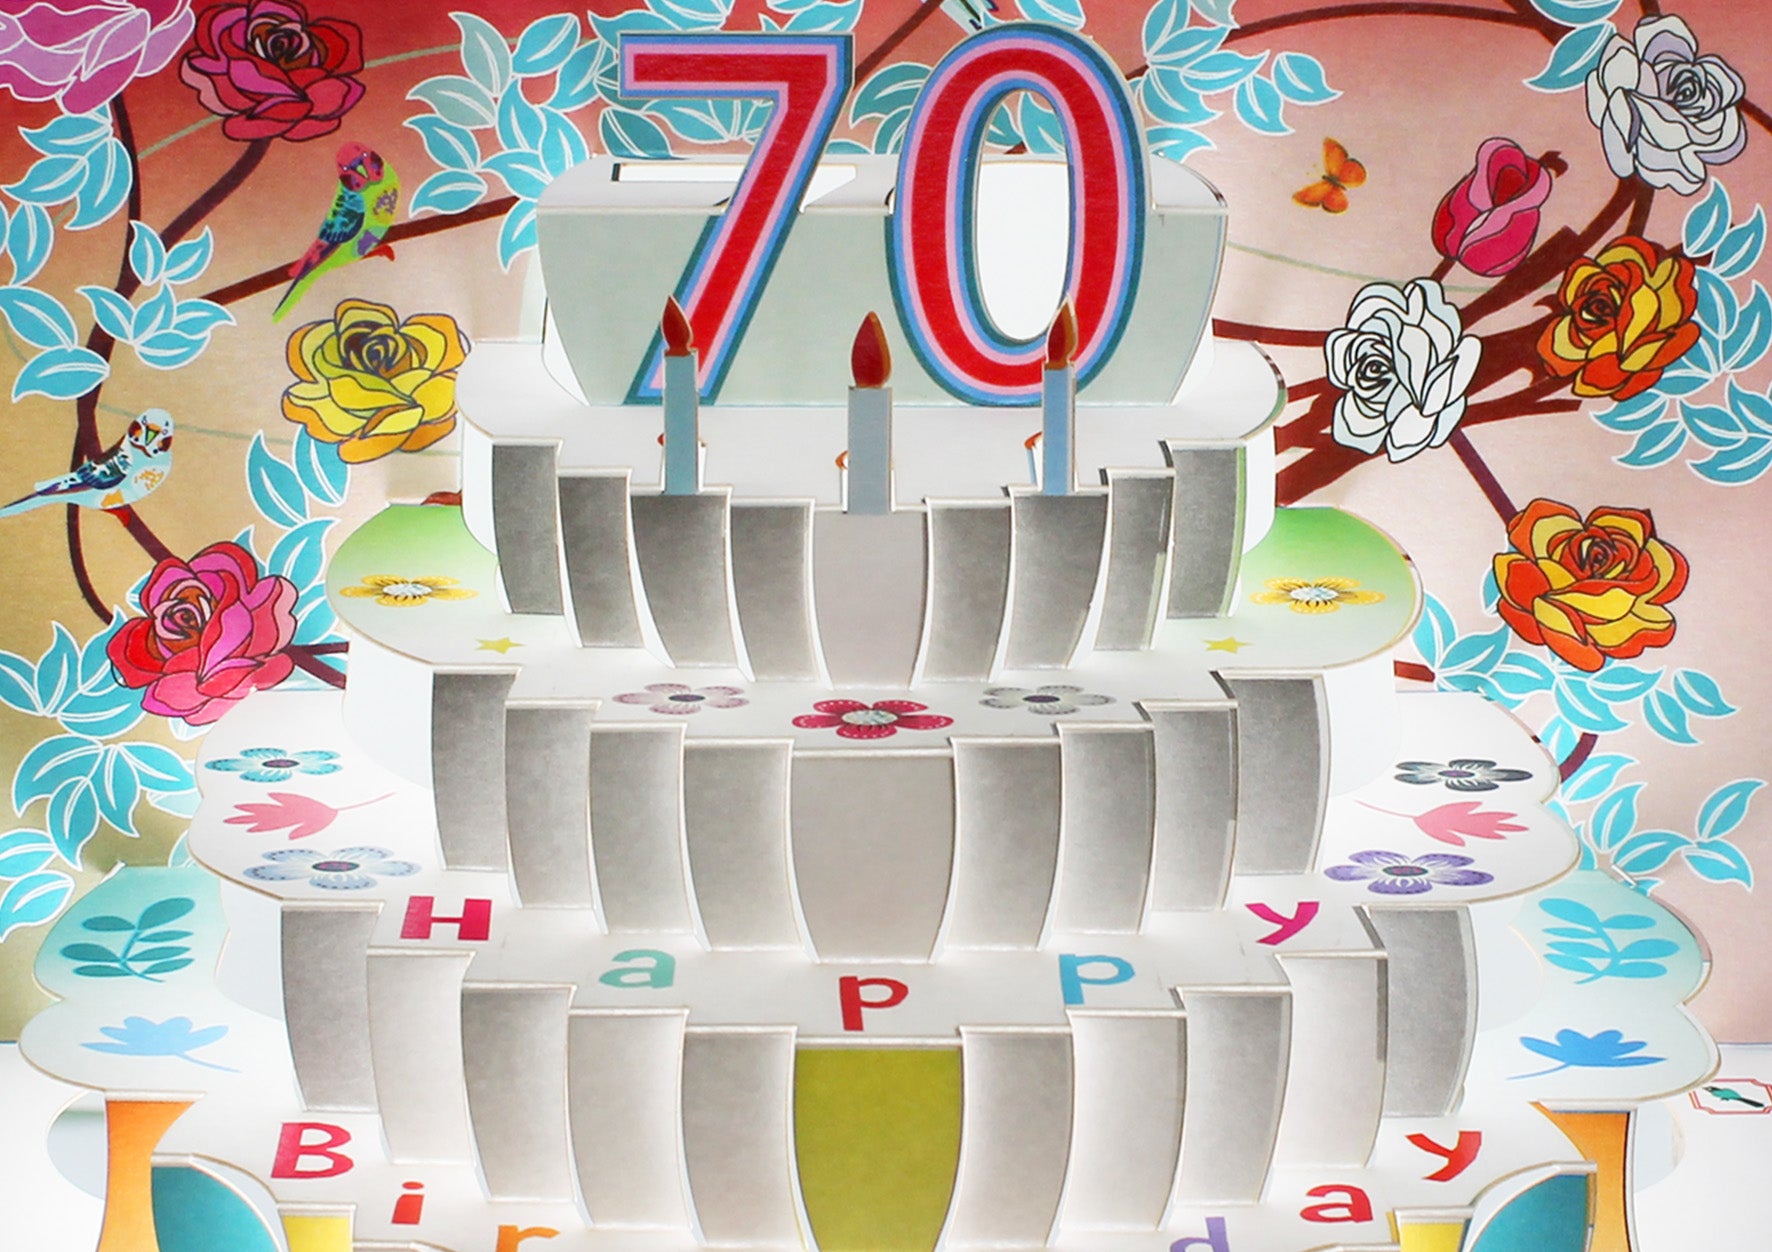 Floral Happy 70th Birthday 3D Pop Up Greetings Card